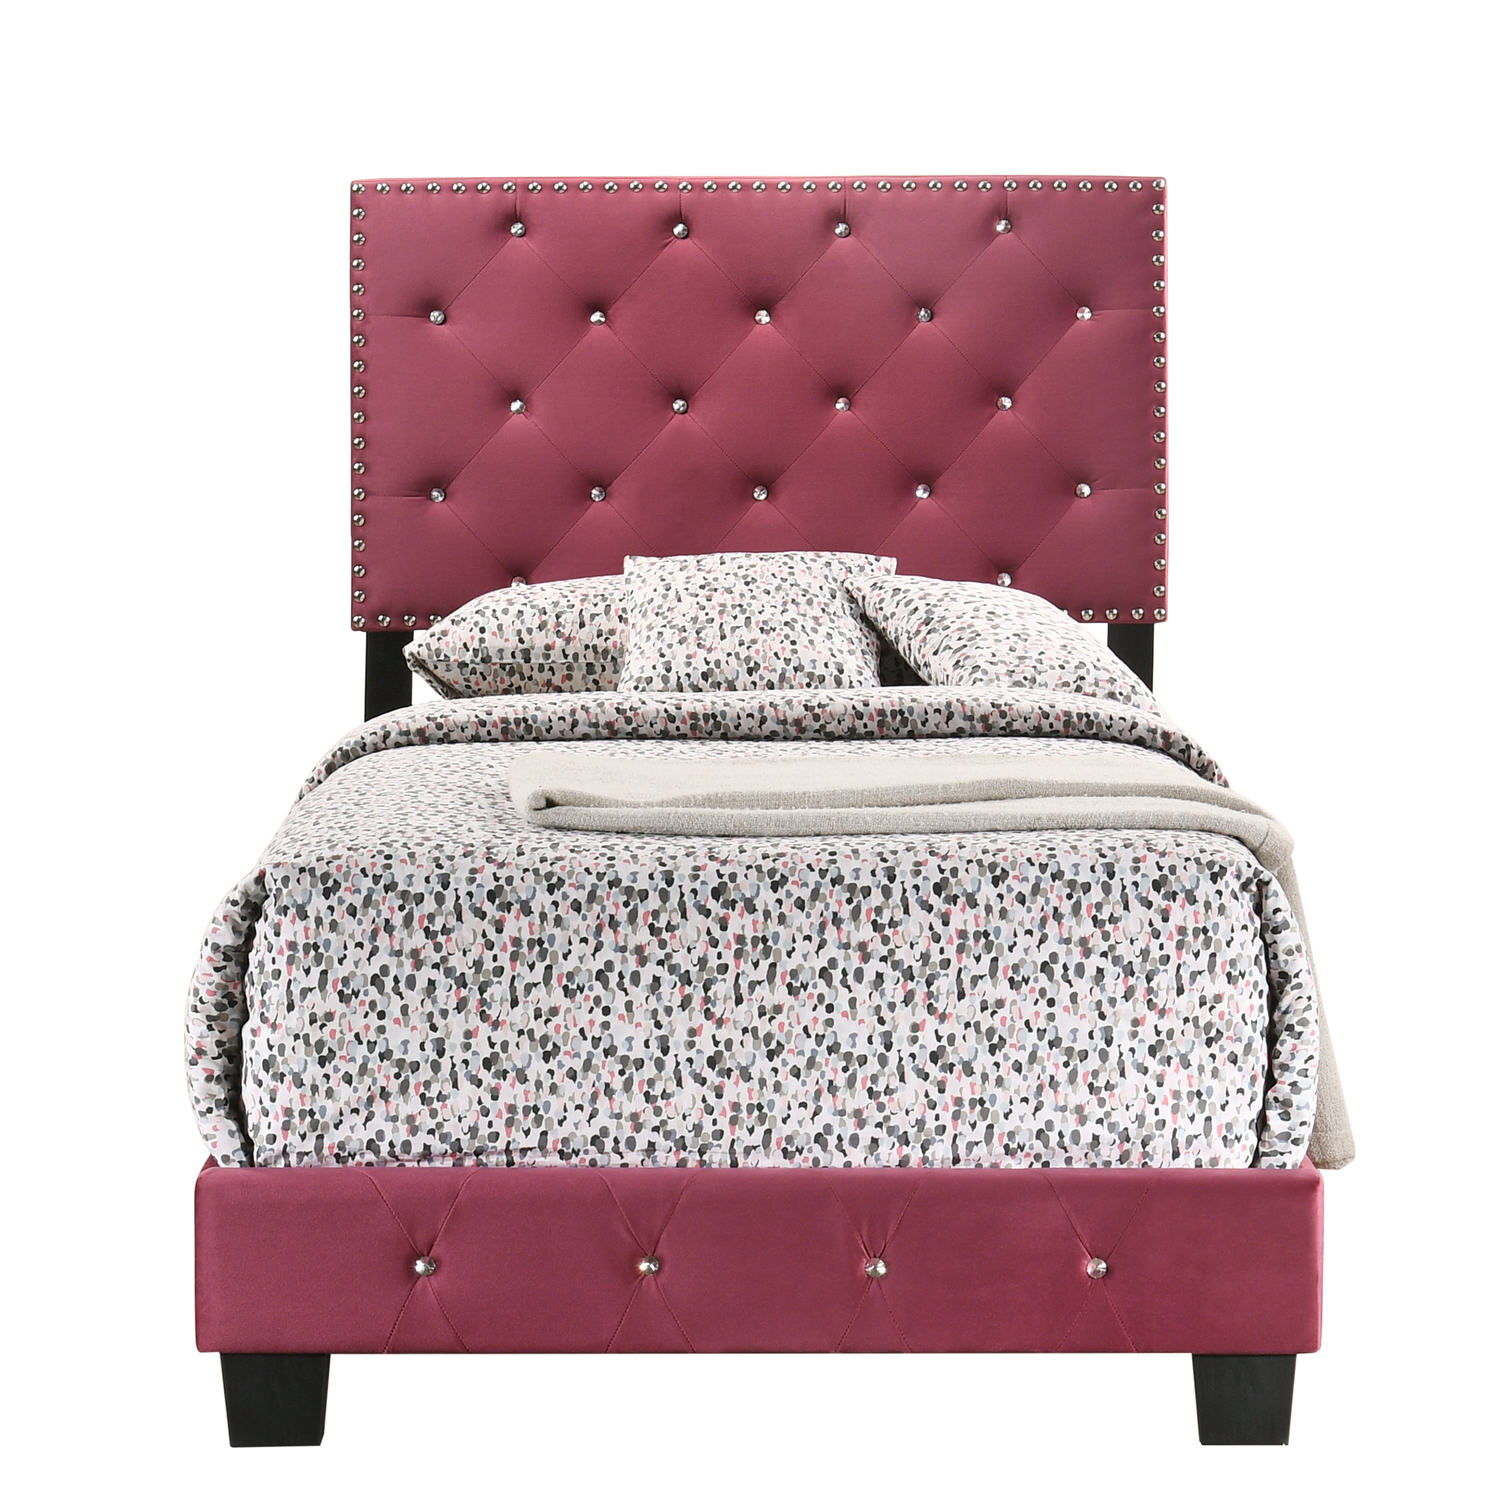 LYKE Home Twin Bed , Cherry - image 1 of 1